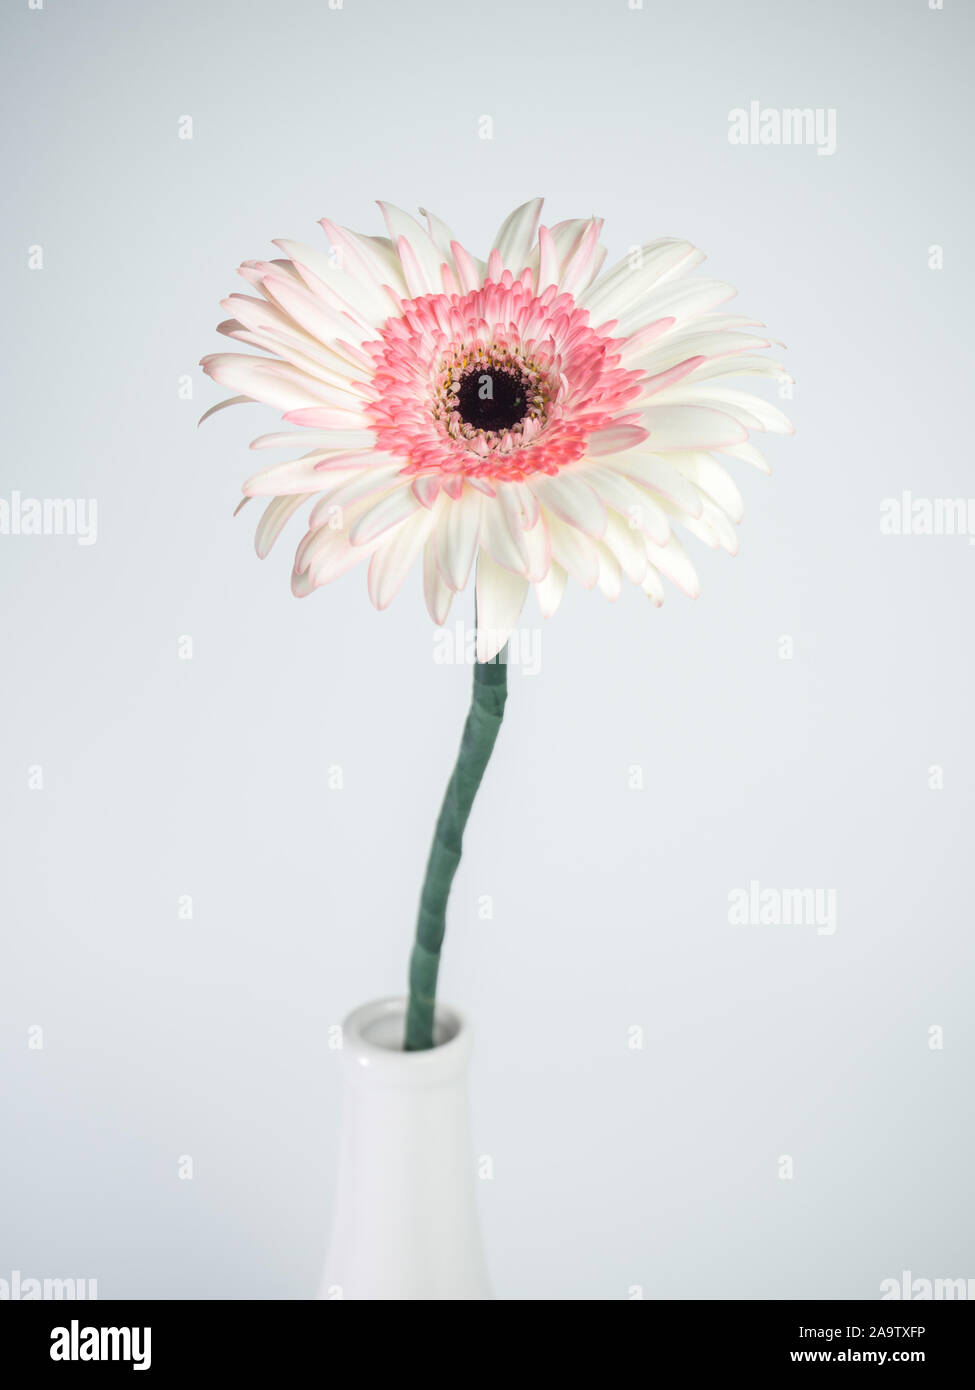 beautiful pink and white gerbera daisy flower isolated on white background Stock Photo